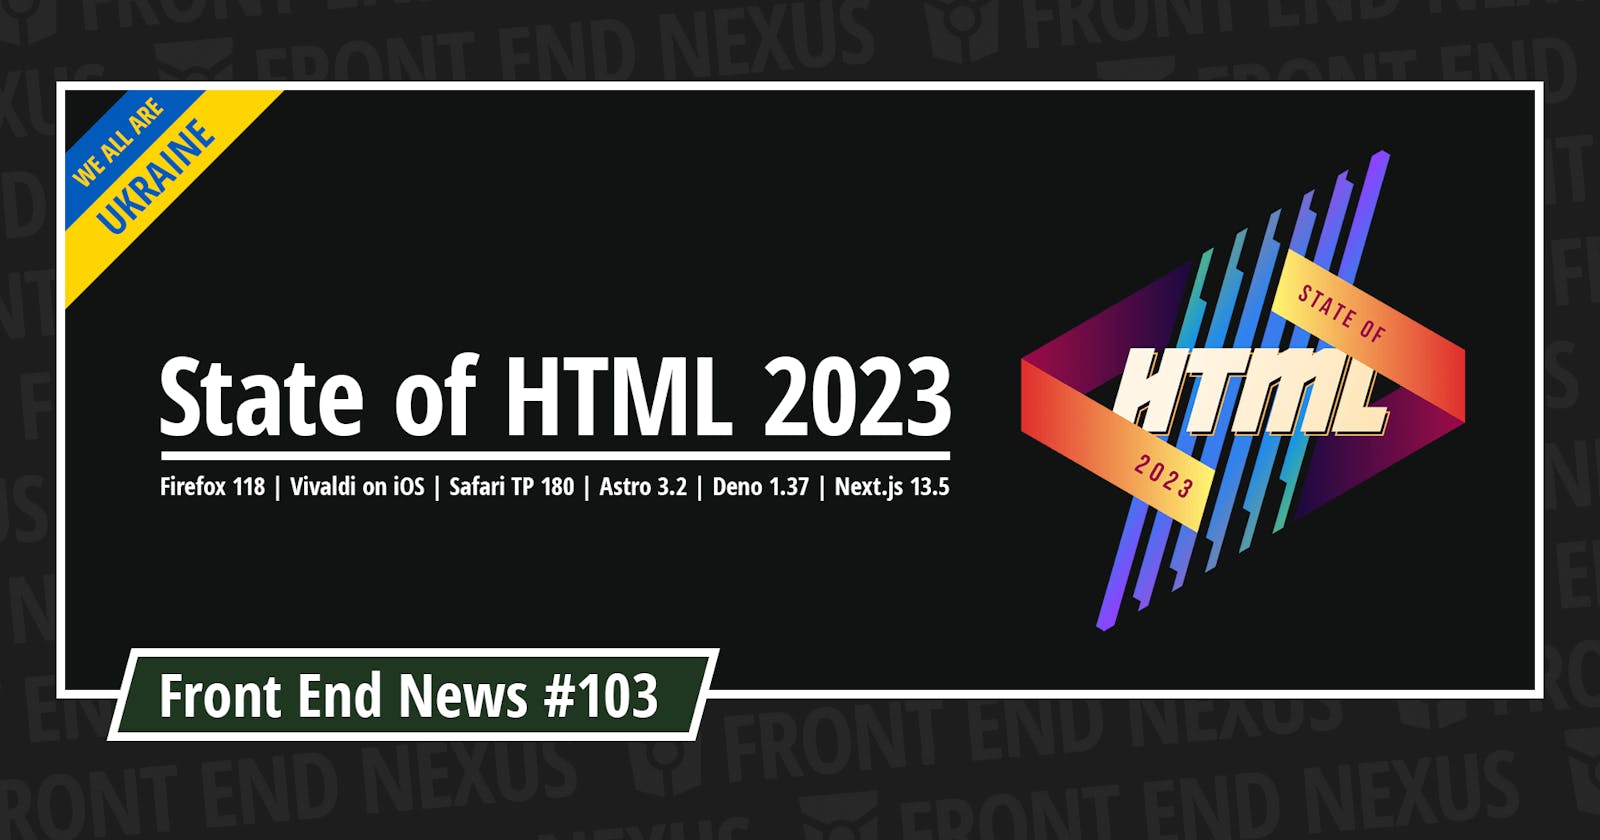 State of HTML, Firefox 118, Vivaldi on iOS, Safari TP 180, Astro 3.2, Deno 1.37, Next.js 13.5, and more | Front End News #103